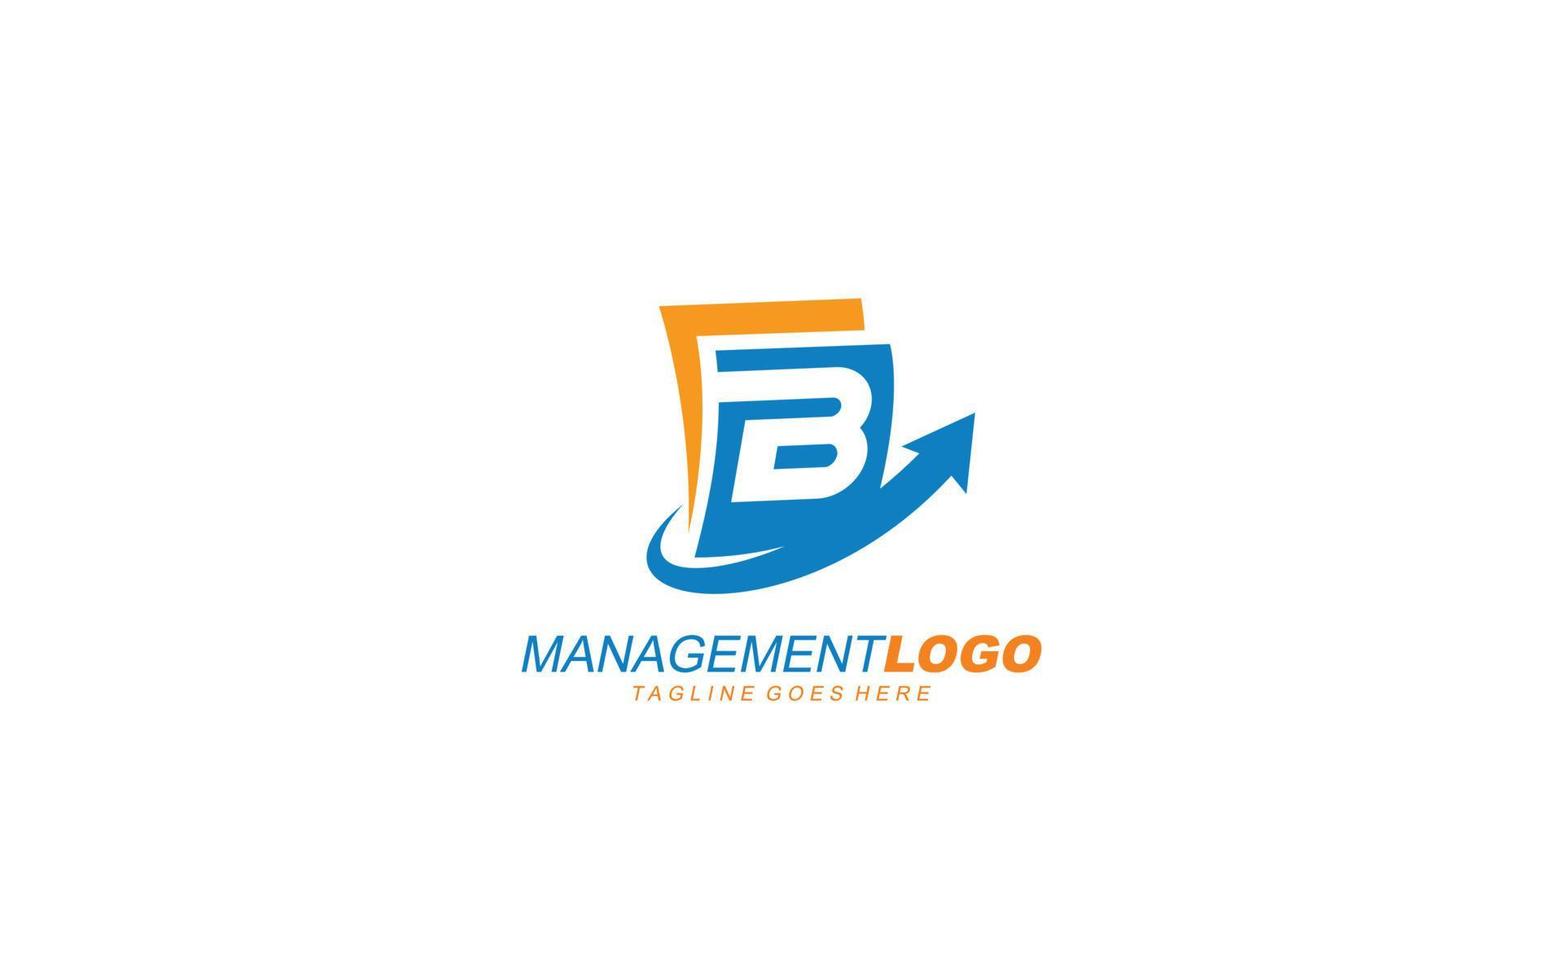 B logo management for company. letter template vector illustration for your brand.